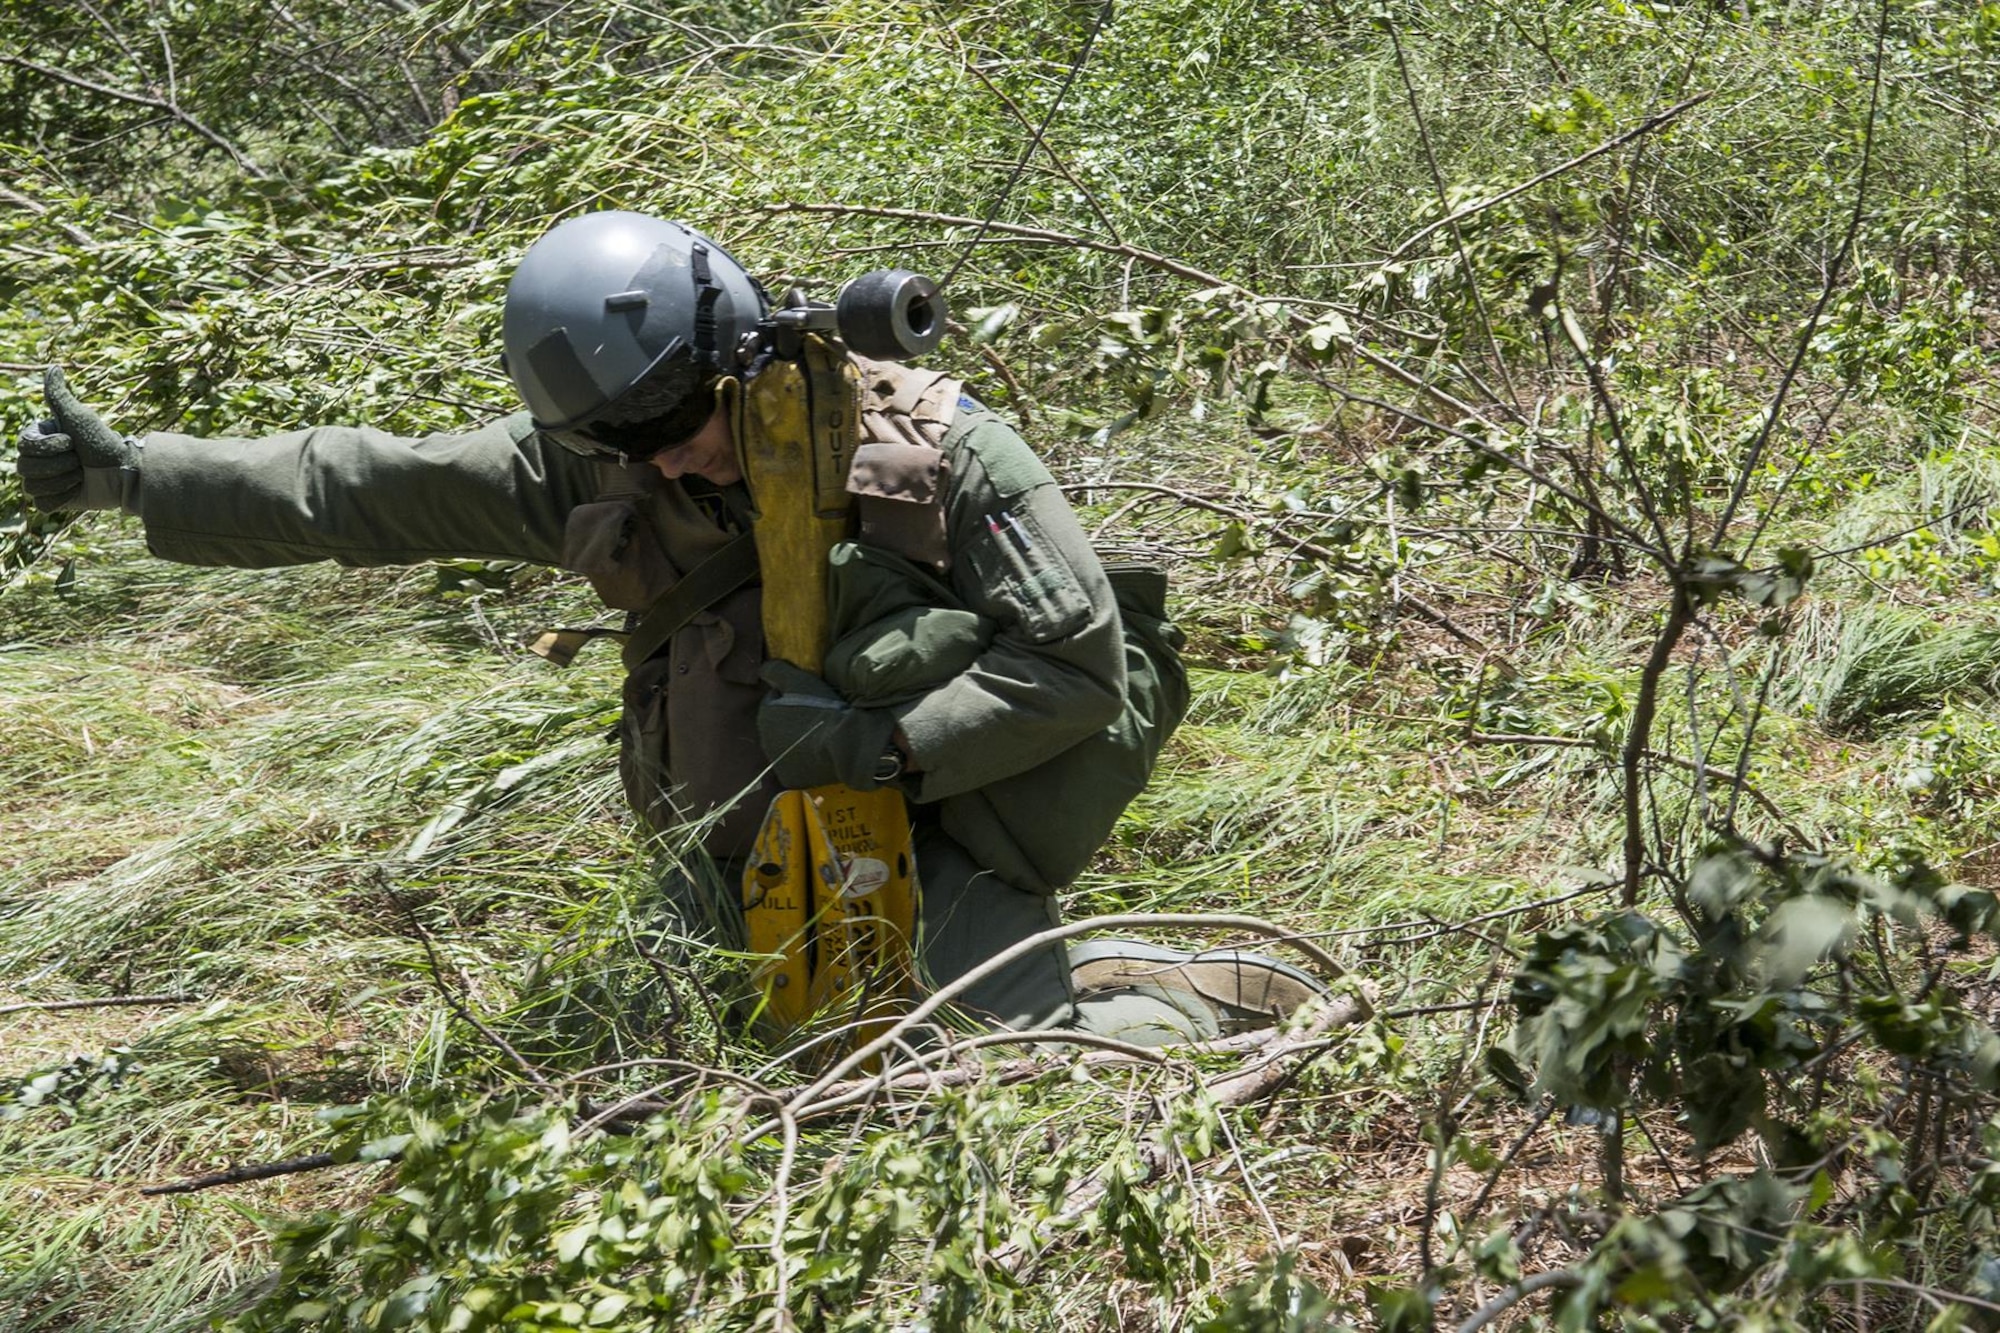 U.S. Air Force Lt. Col. Christopher Anderson, the commander of the 307th Operations Support Squadron, gives a thumbs to the helicopter crew as he grabs a tight hold onto the forest penetrator that will be used to hoist him up during SERE training on May 14, 2016, Claiborne Gunnery and Bombing Range, La. SERE, which stands for Survival, Evasion, Resistance and Escape, is required training for all aircrew members and provides the knowledge and tools necessary to survive on their own in any environment and under any condition should they have to abandon their aircraft. (U.S. Air Force photo by Master Sgt. Greg Steele/Released)